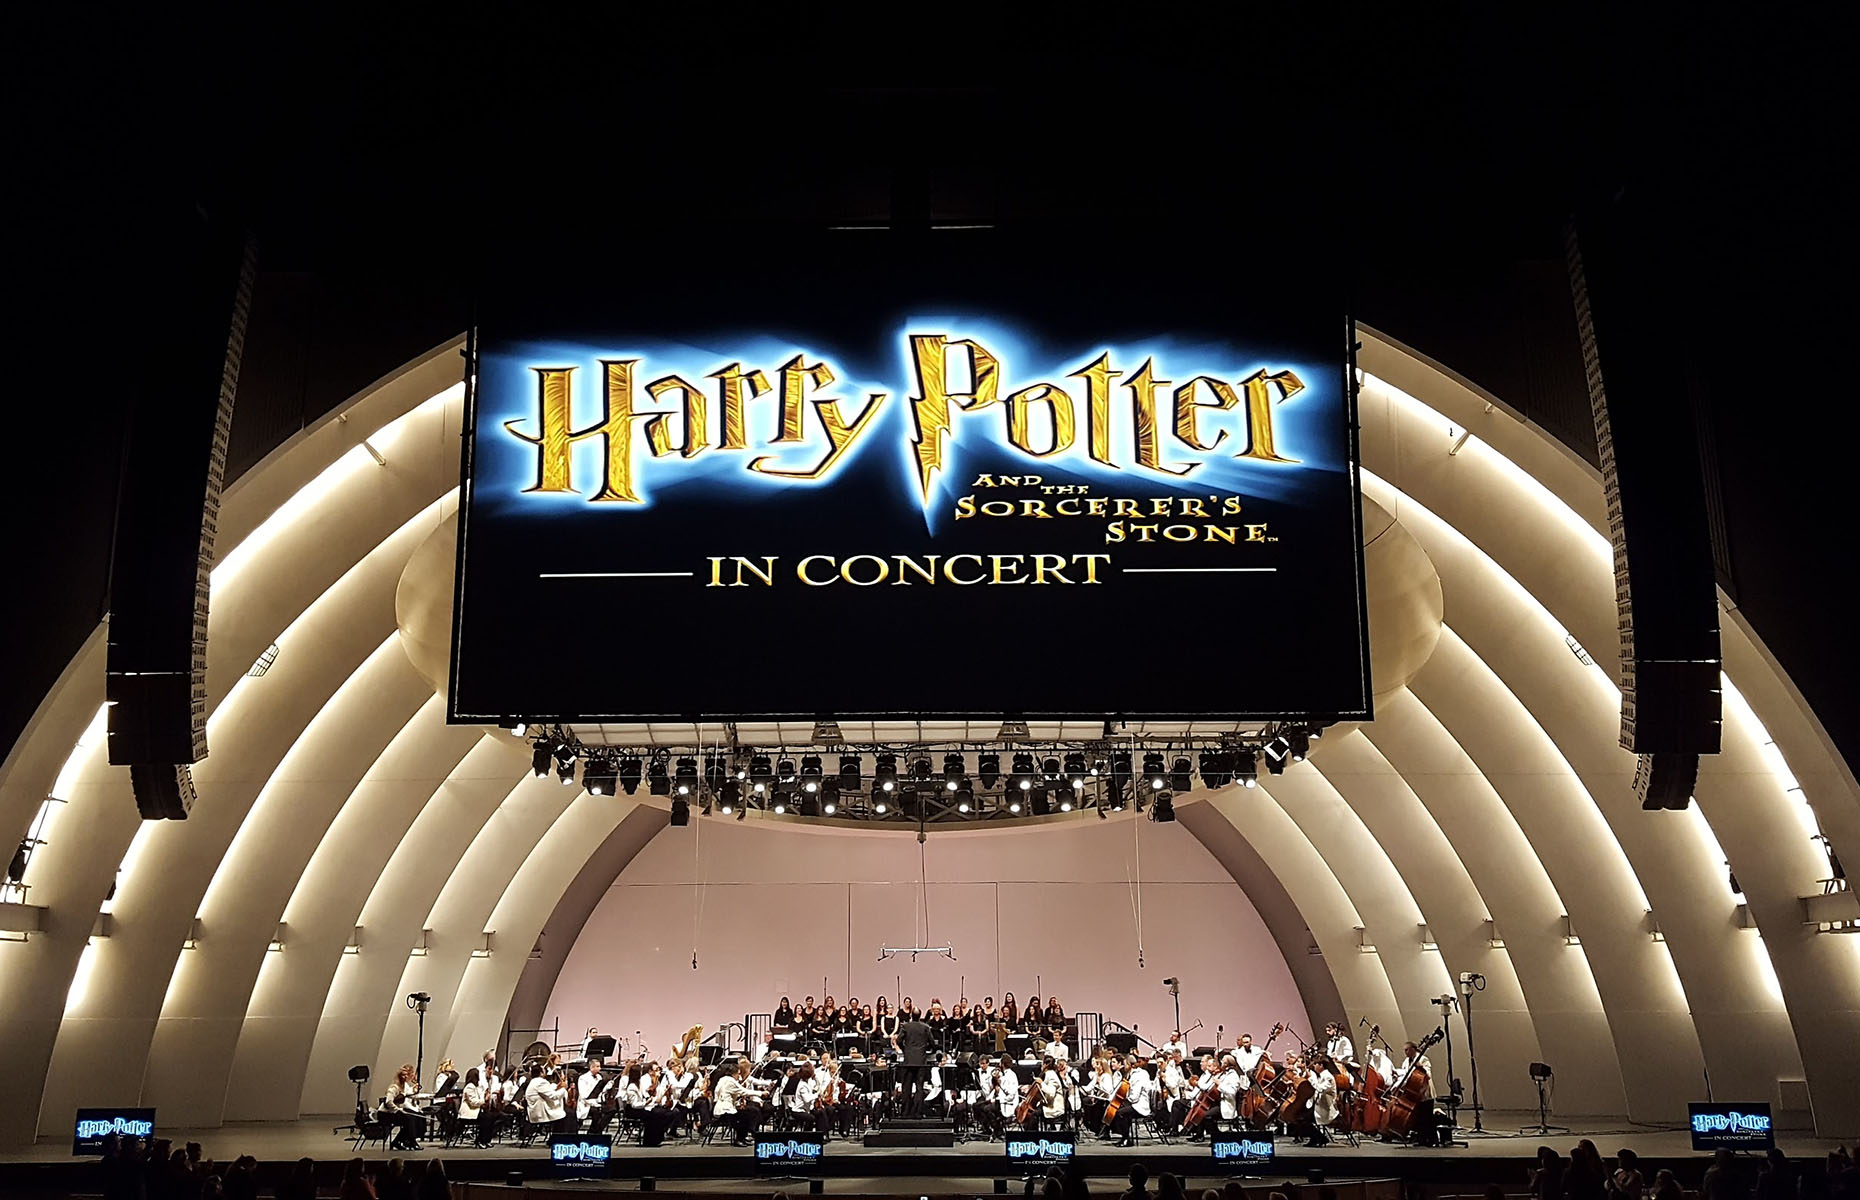 Harry Potter Film Concert Series (Image: The Harry Potter Film Concert Series)